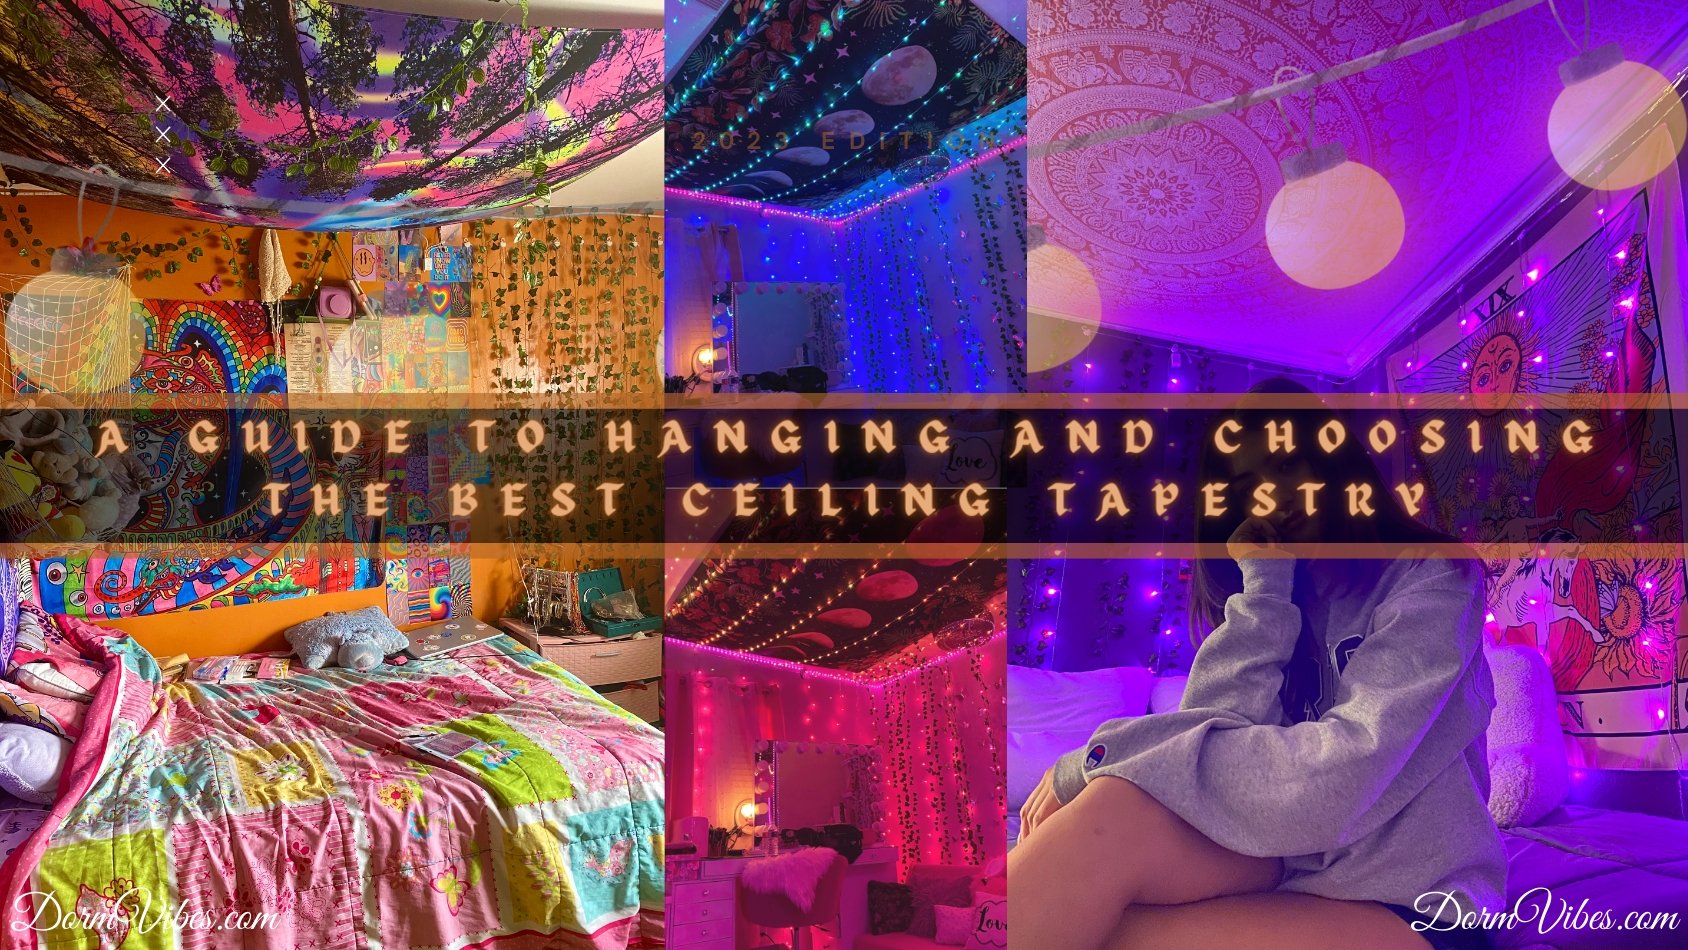 A Guide To Hanging And Choosing The Best Ceiling Tapestry Dormvibes